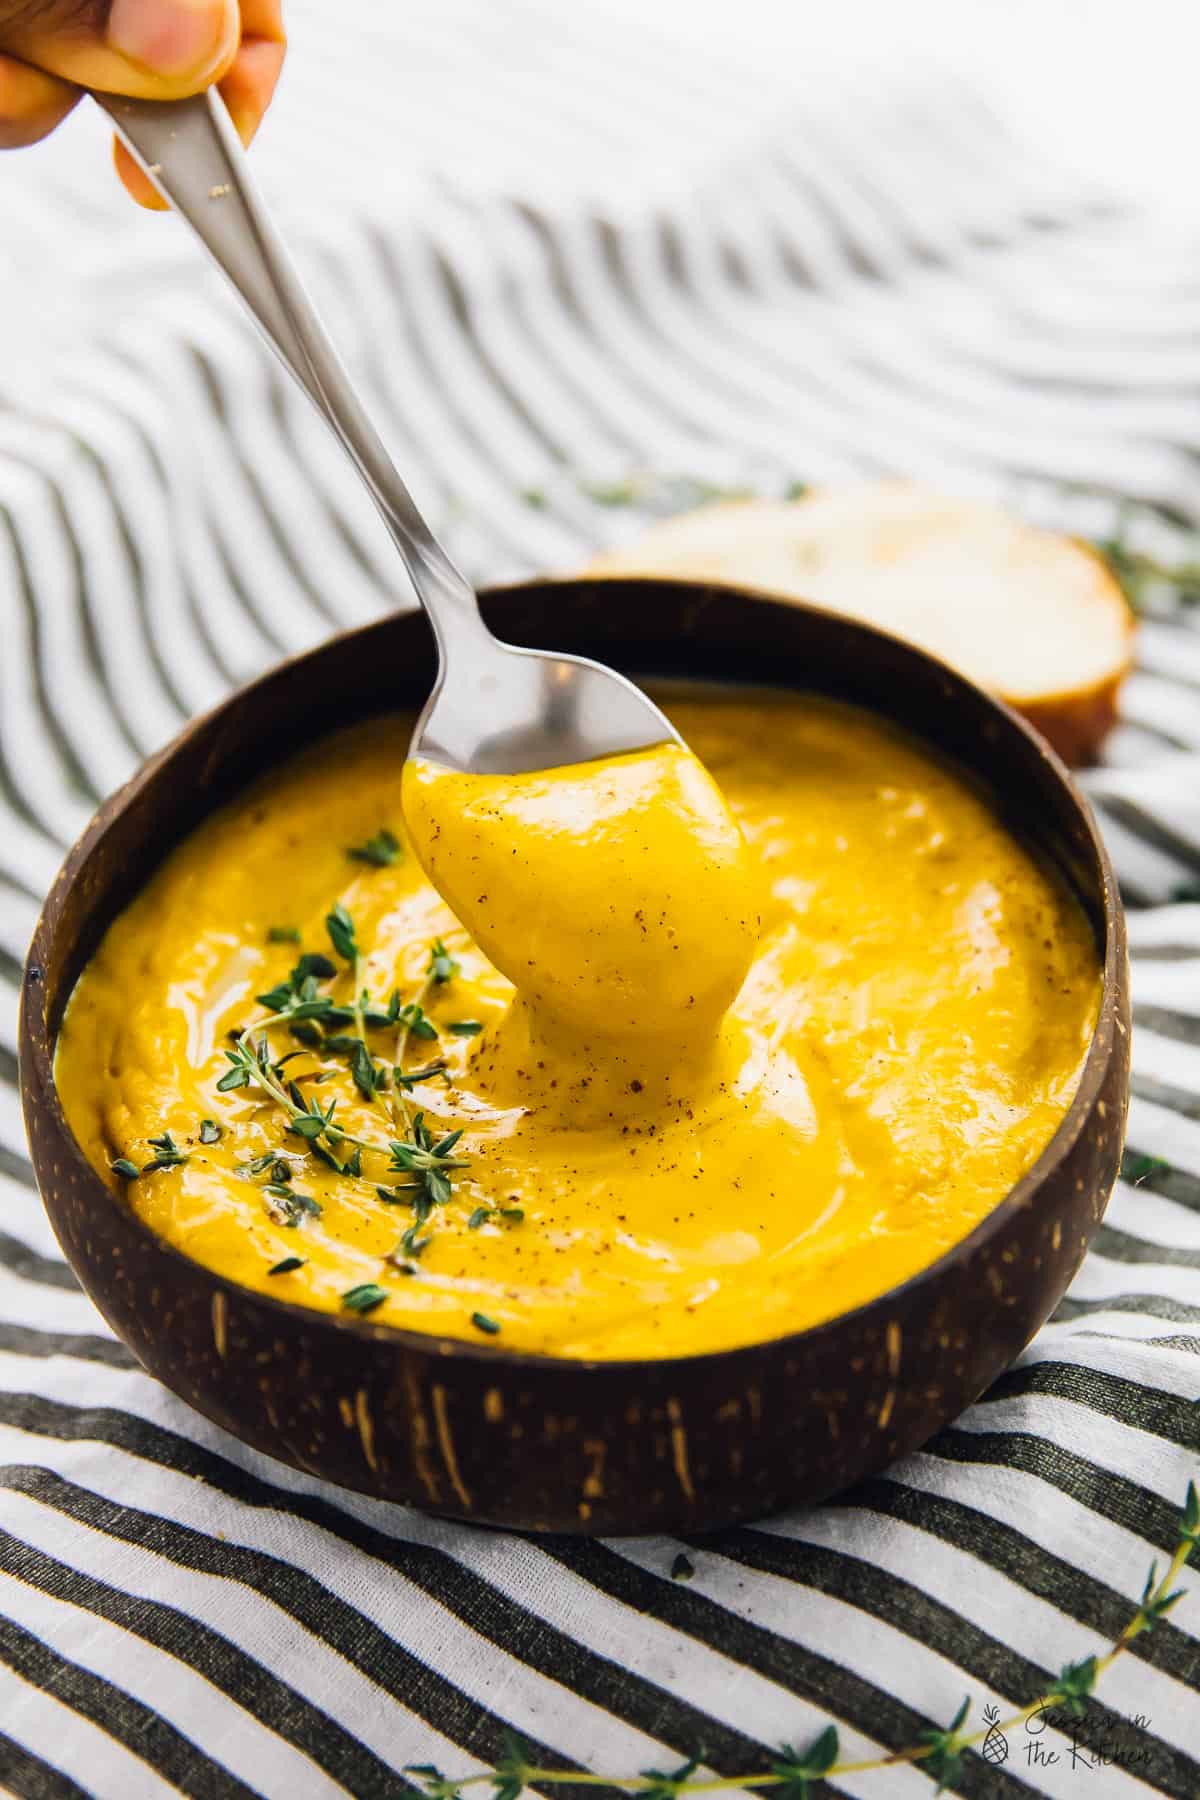 Bowl of roasted sweet potato soup with spoon lifting some out.